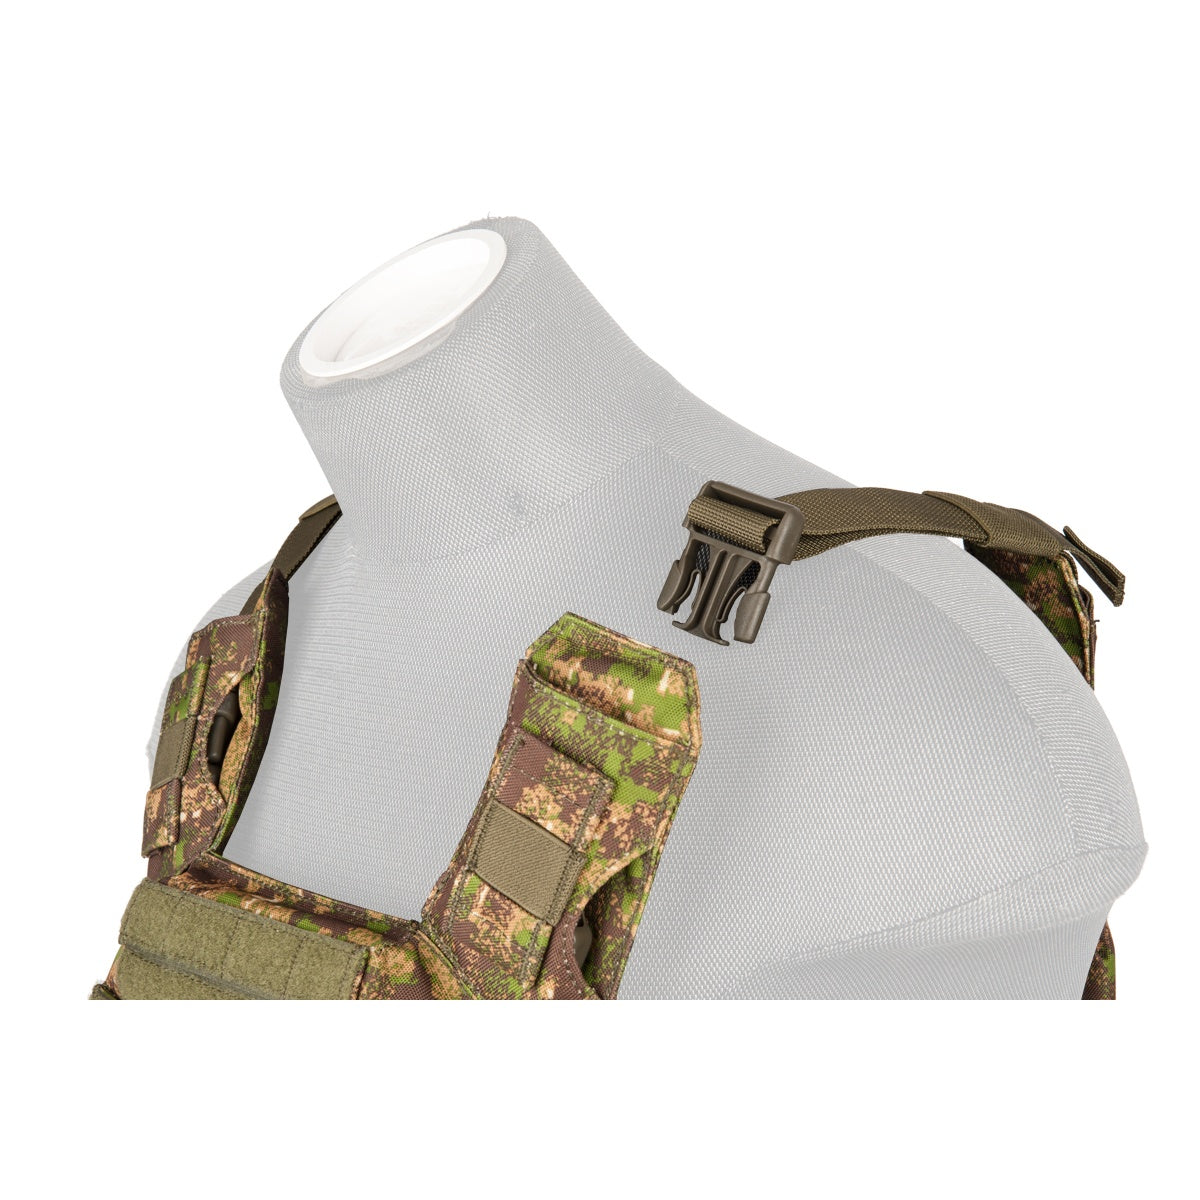 Lancer Tactical Speed Attack Tactical Vest (PC Green) - ssairsoft.com